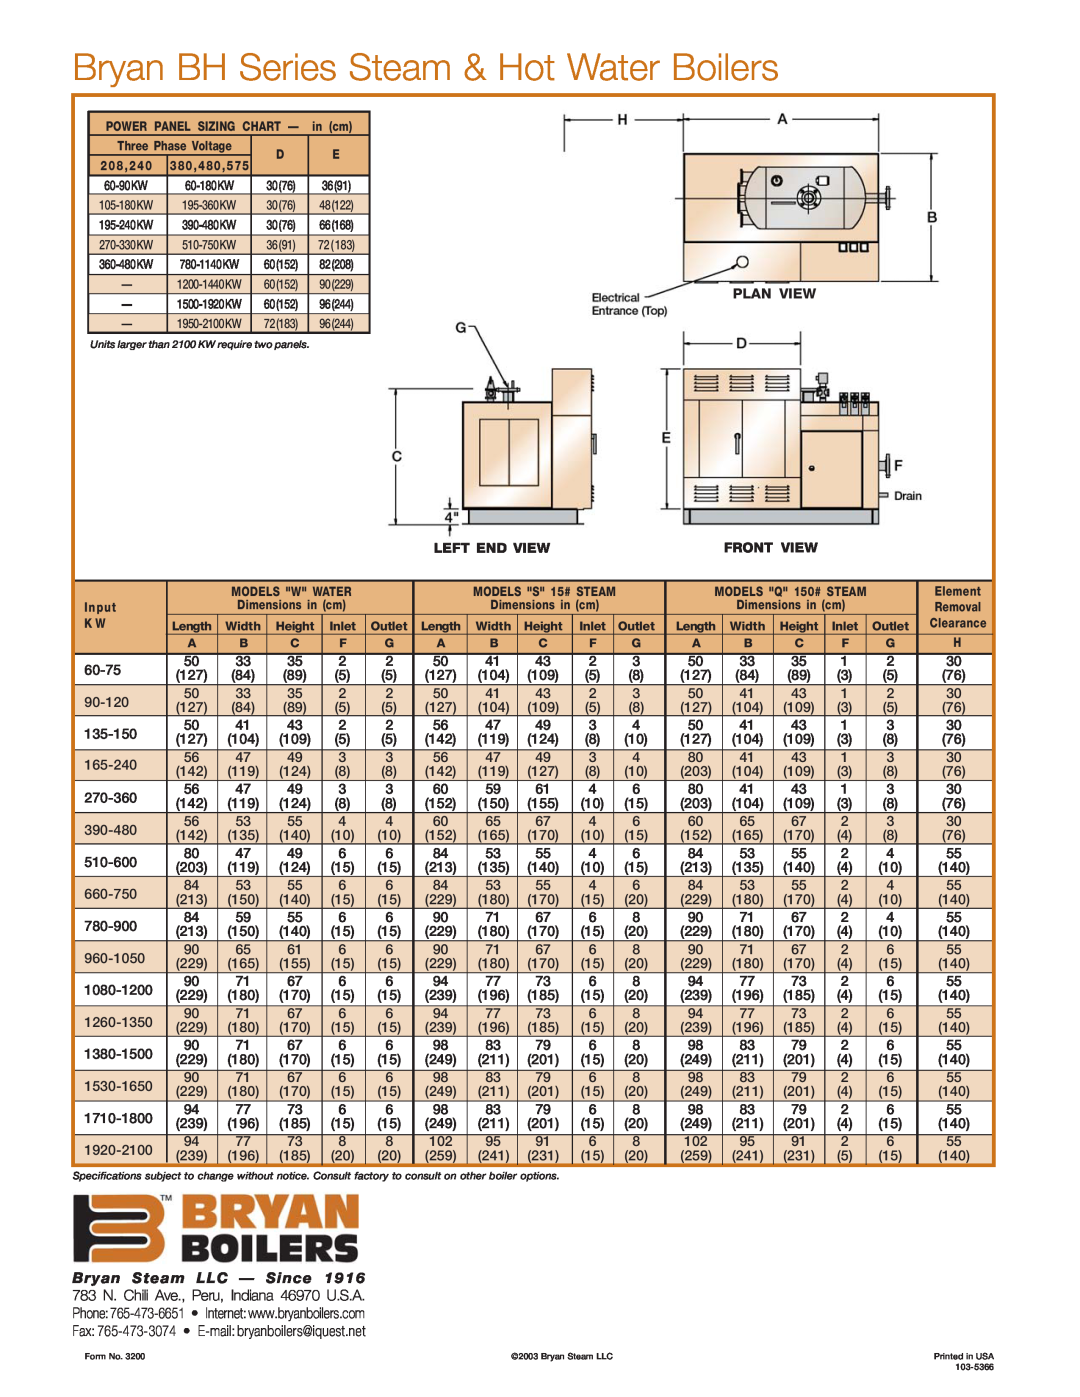 Bryan Boilers 390BHW4T7, 240BHS4T8 manual Bryan BH Series Steam & Hot Water Boilers, Plan View, Left End View, Front View 